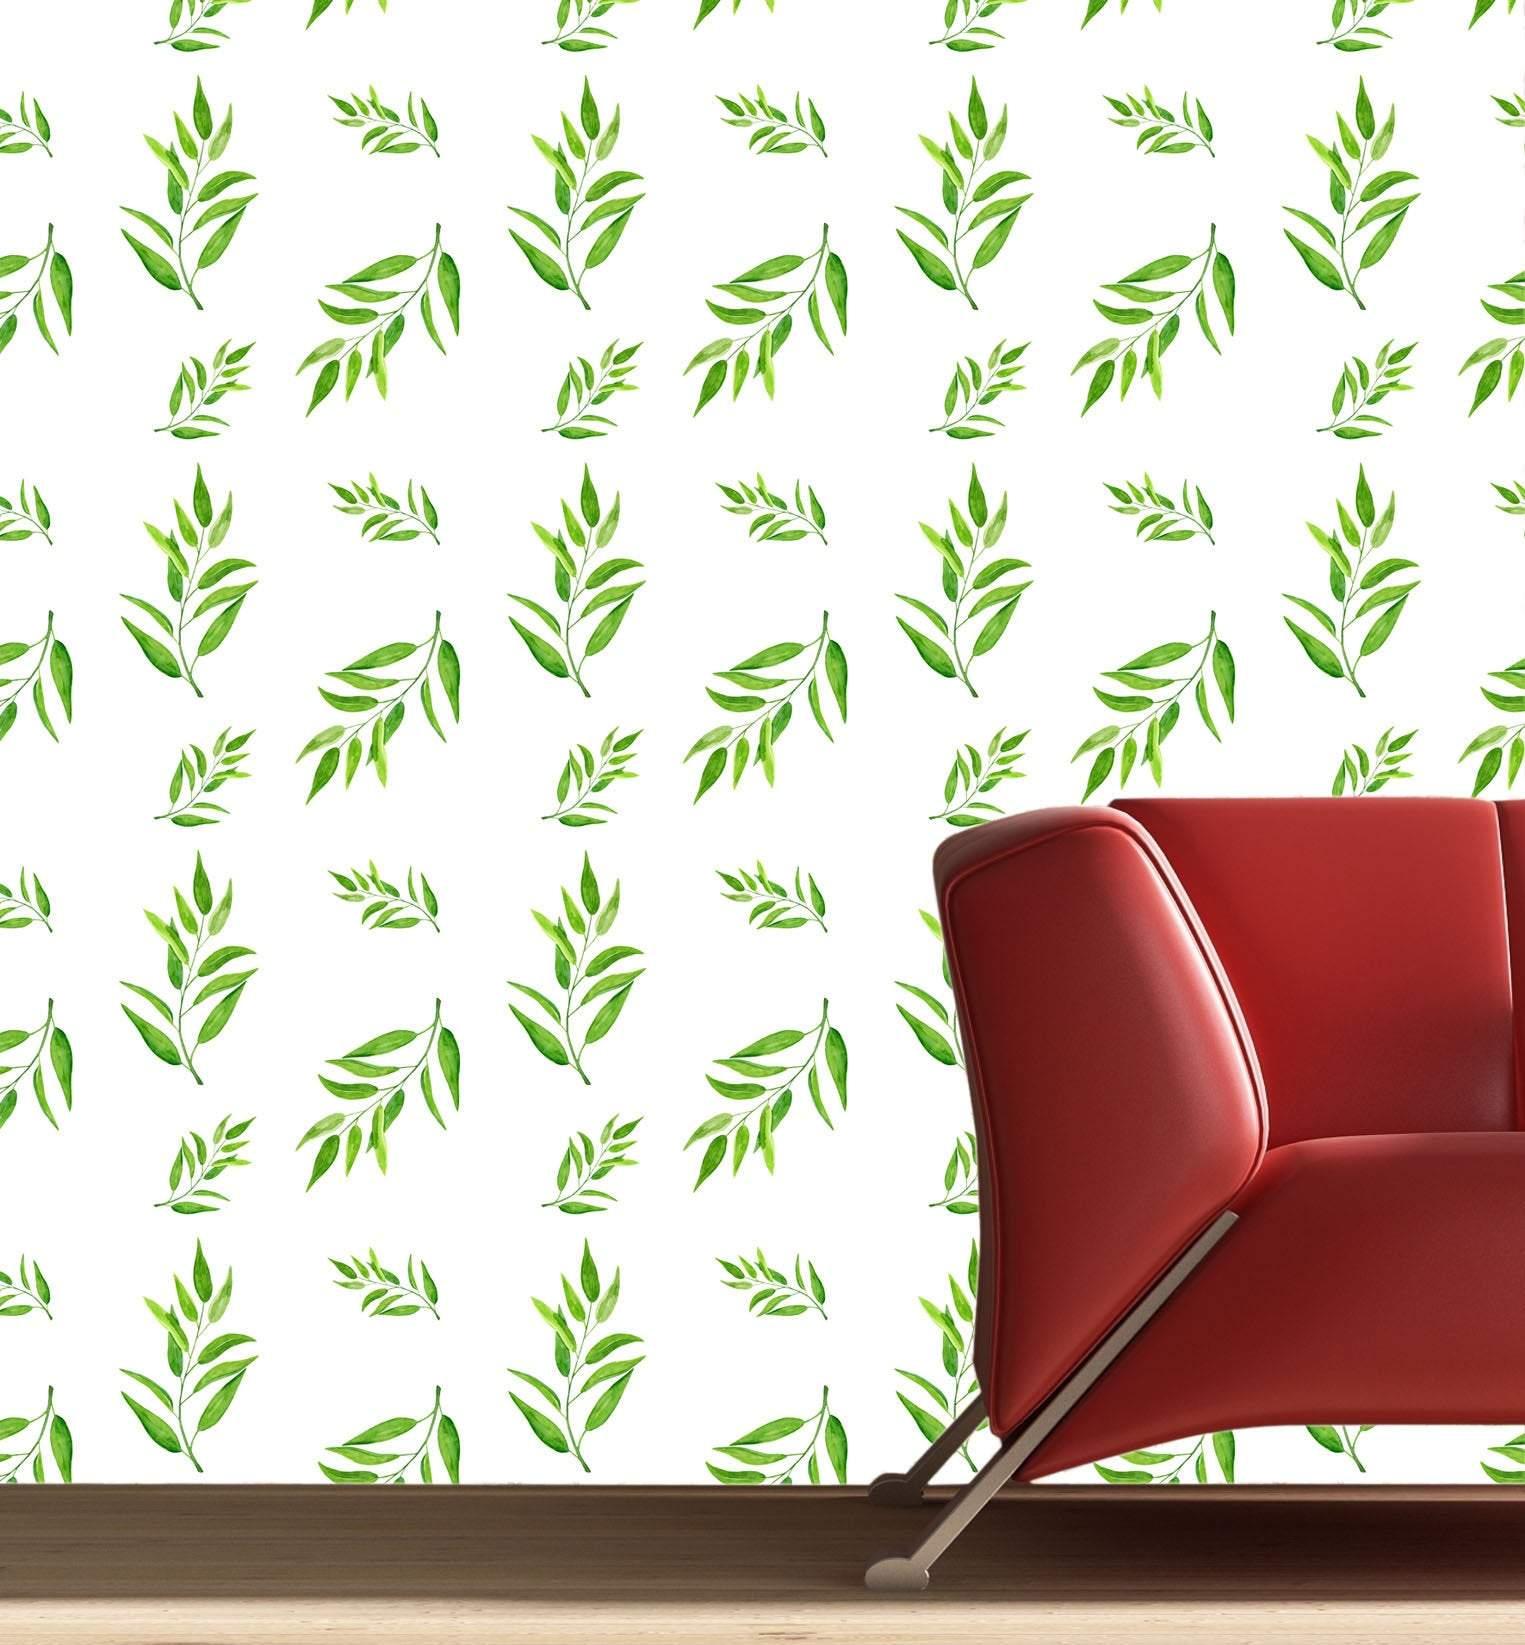 Wallpaper Pattern of green leaves | Removable Wallpaper | Peel-N-Stick | Seamless Pattern | Removable Fabric